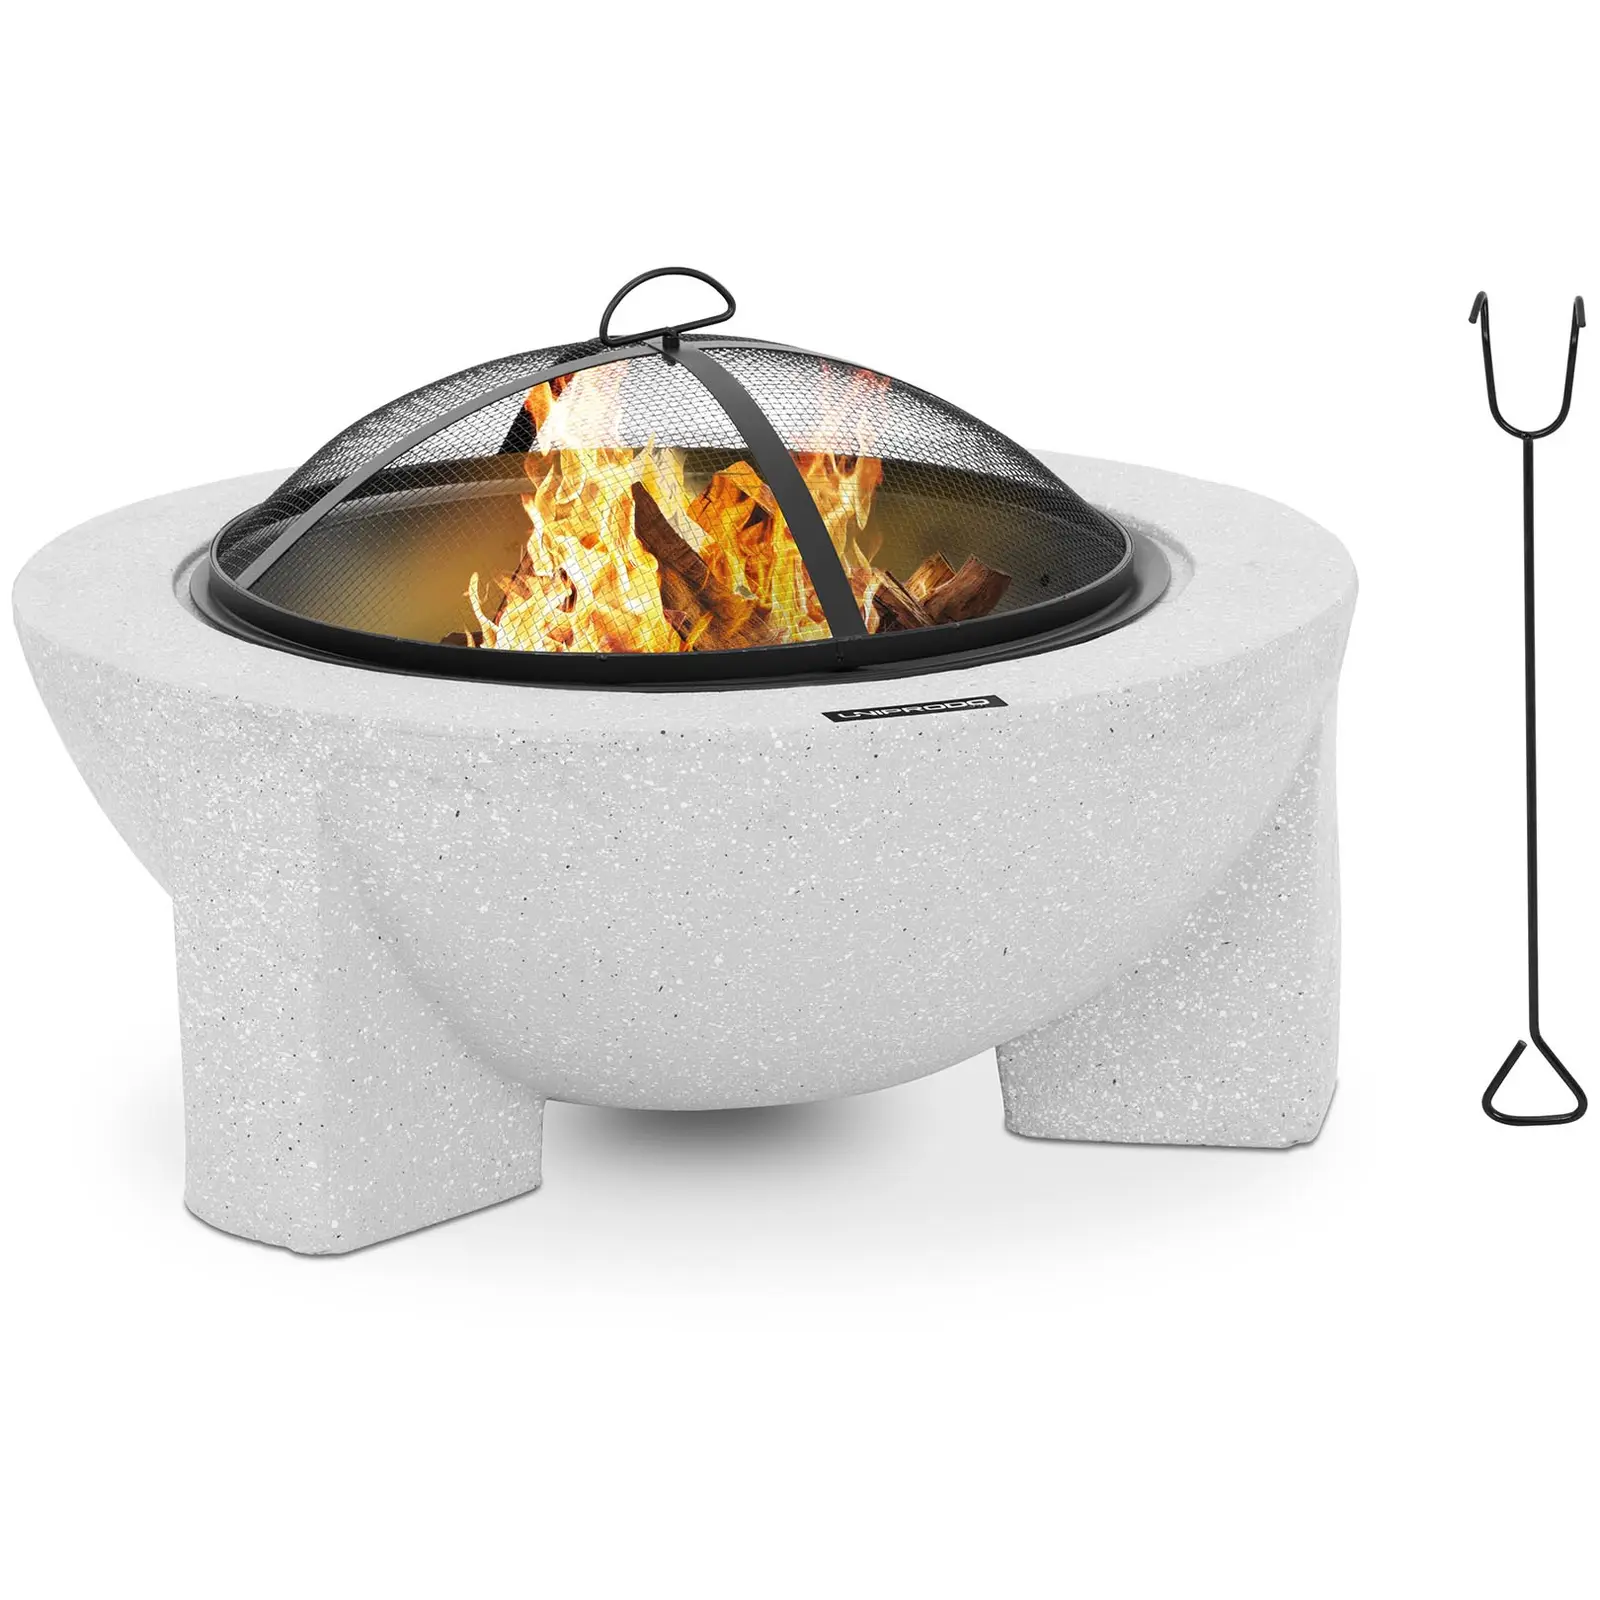 Fire bowl - with grill grate - light gray -74 x 74 x 48 cm